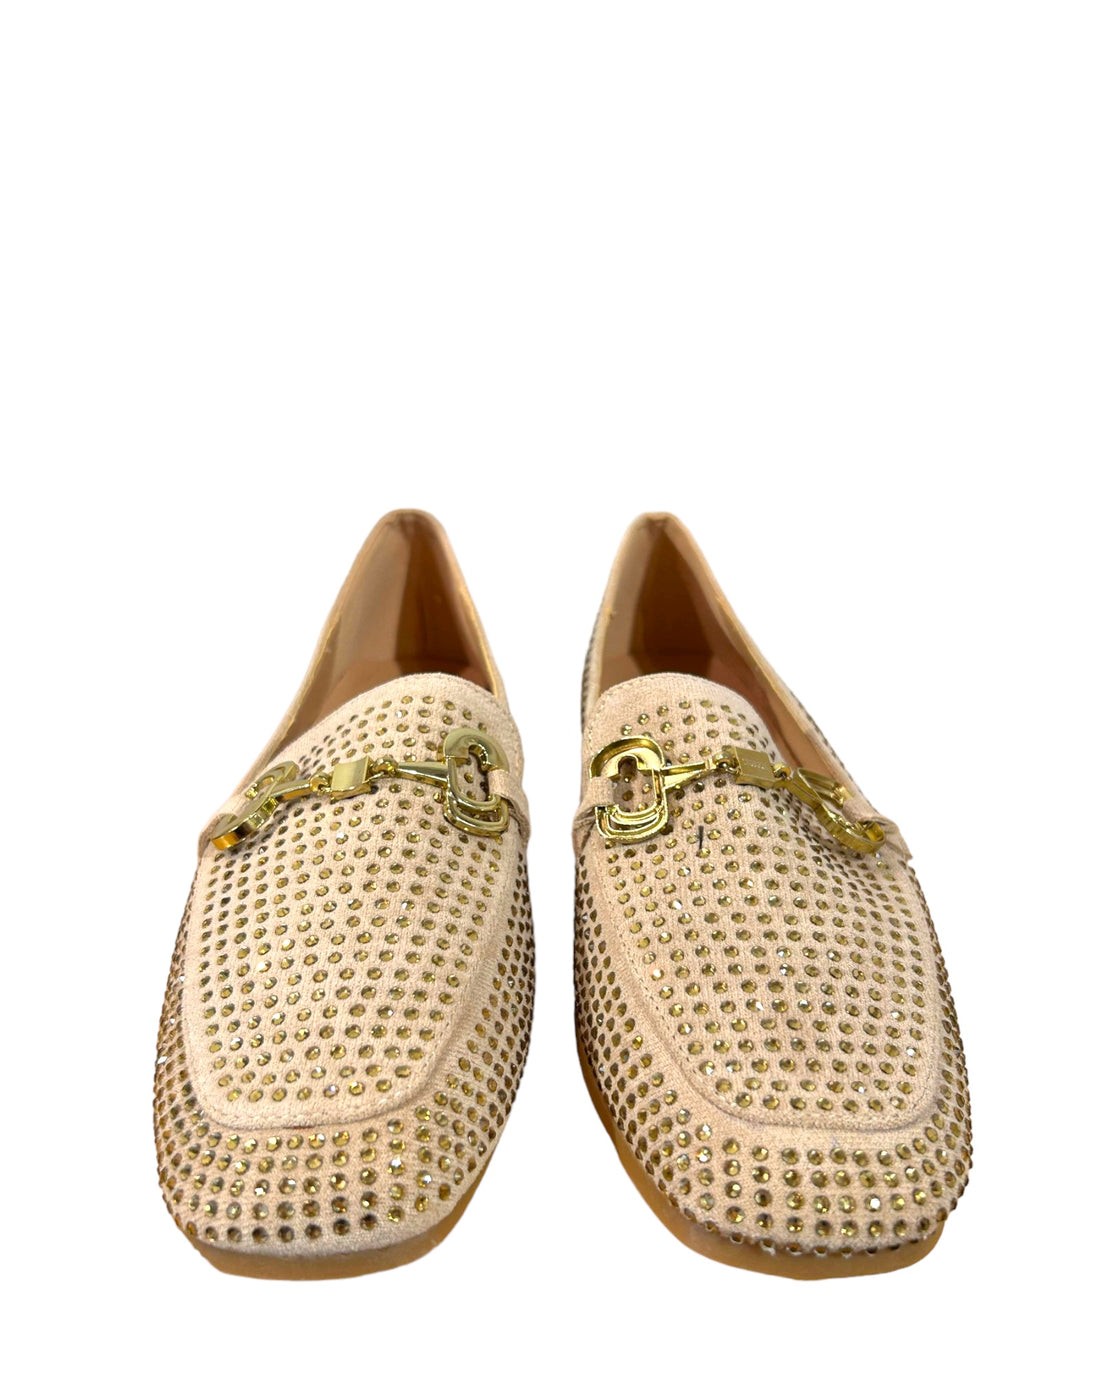 SPARKLE LOAFERS